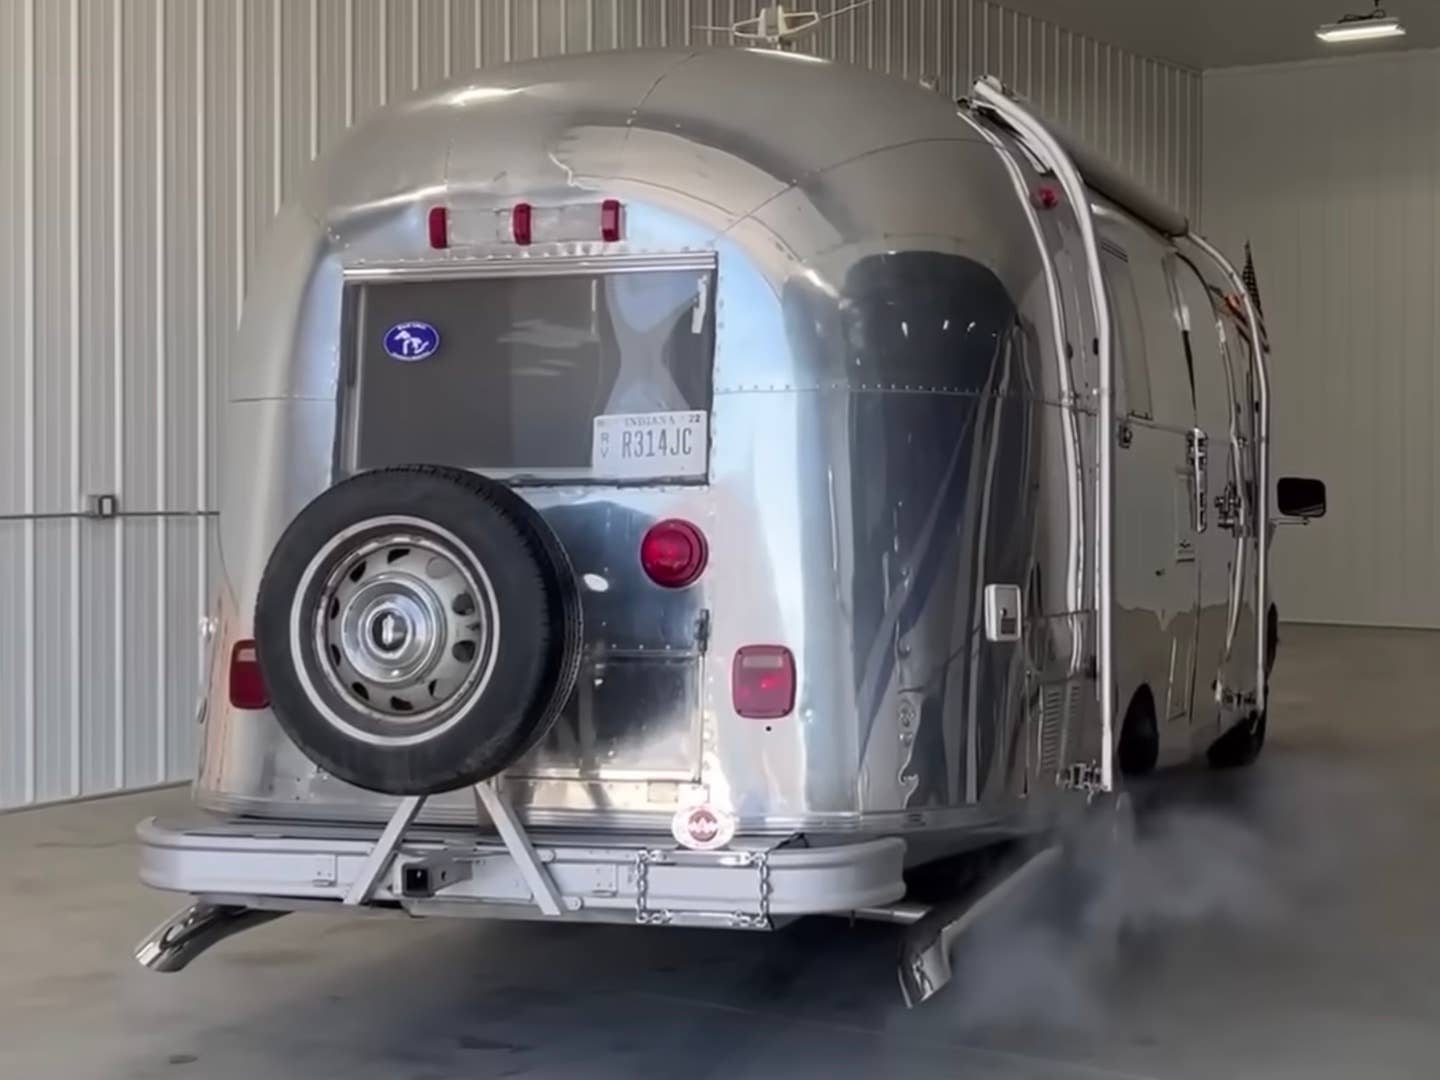 Roadtripping a Homebuilt, Oldsmobile Toronado-Airstream RV Is As Sketchy as It Sounds